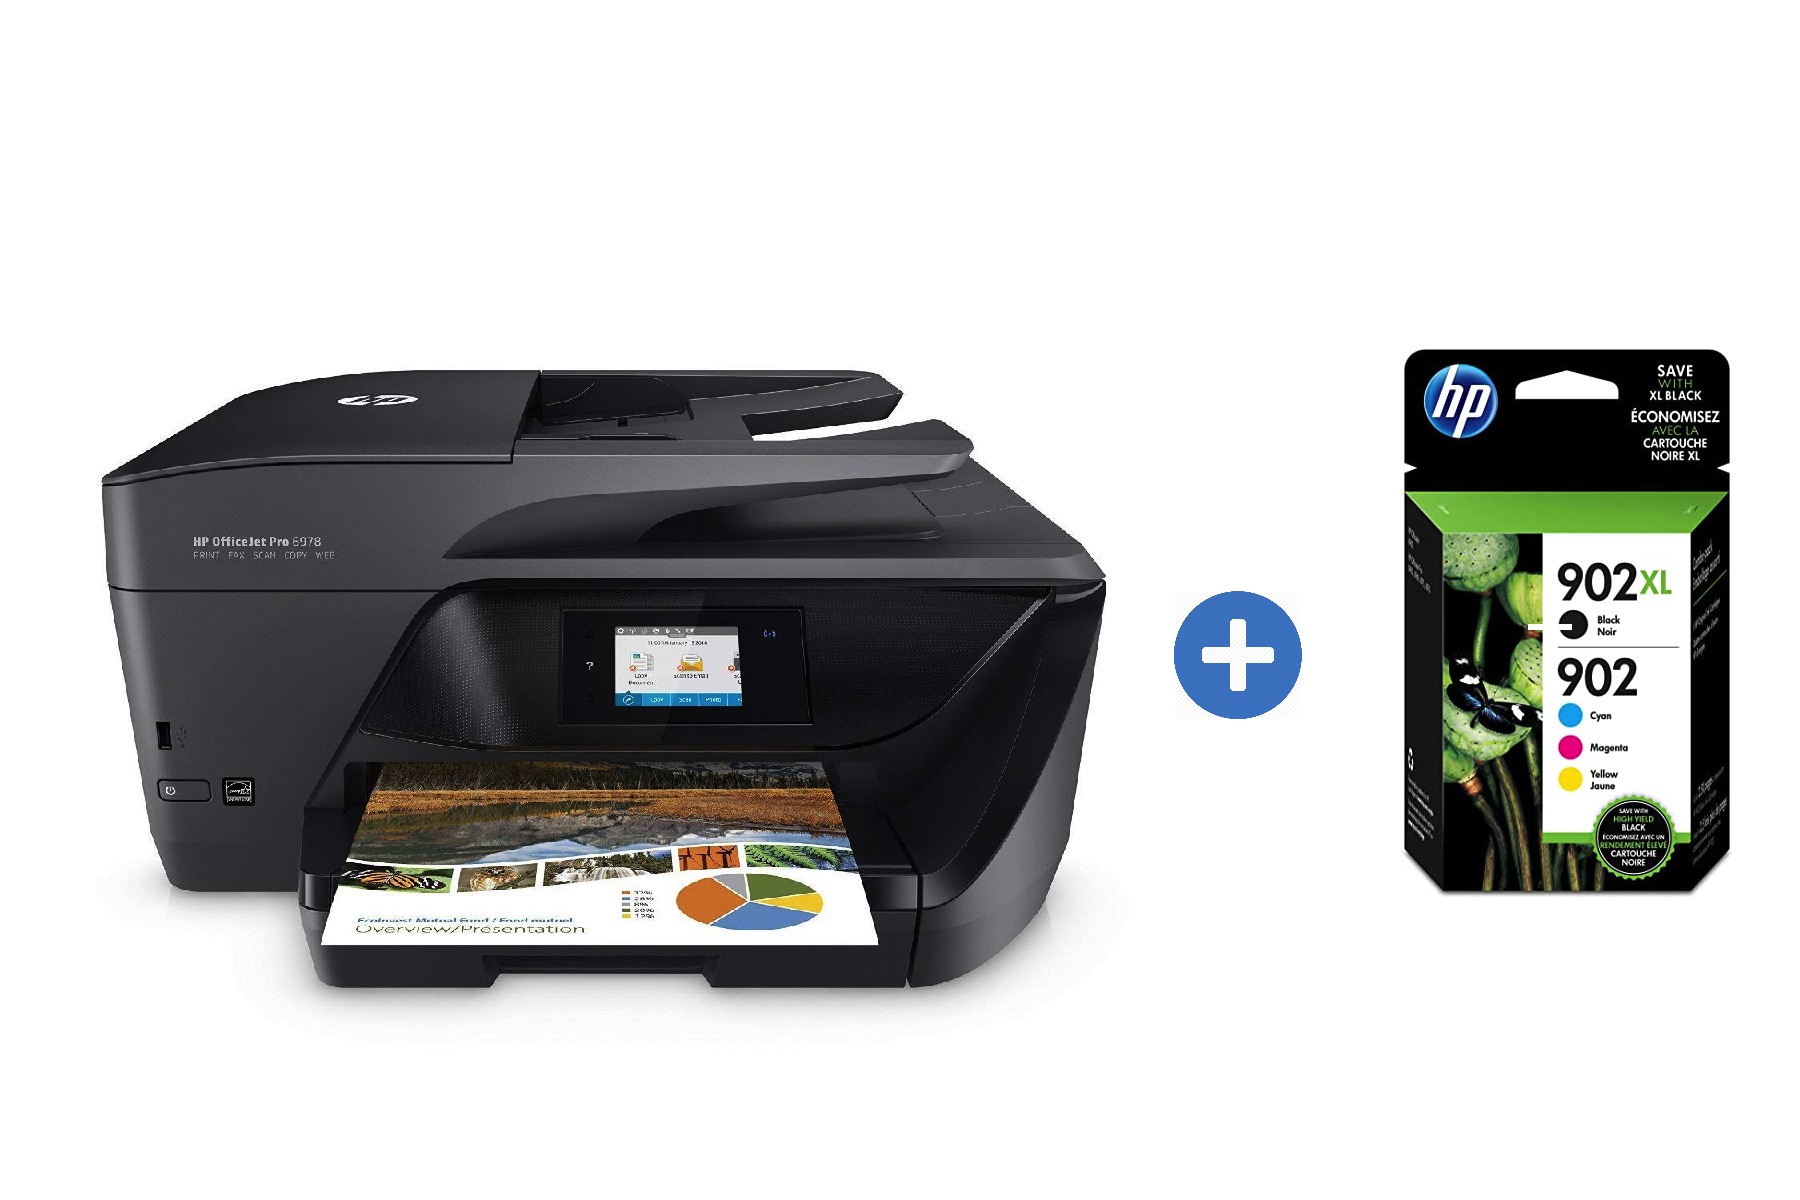 HP OfficeJet Pro 6978 All-in-One Inkjet Color Wireless Printer with Mobile, Two-Sided Printing and Scan, Instant Ink Ready (T0F29A) - image 2 of 2